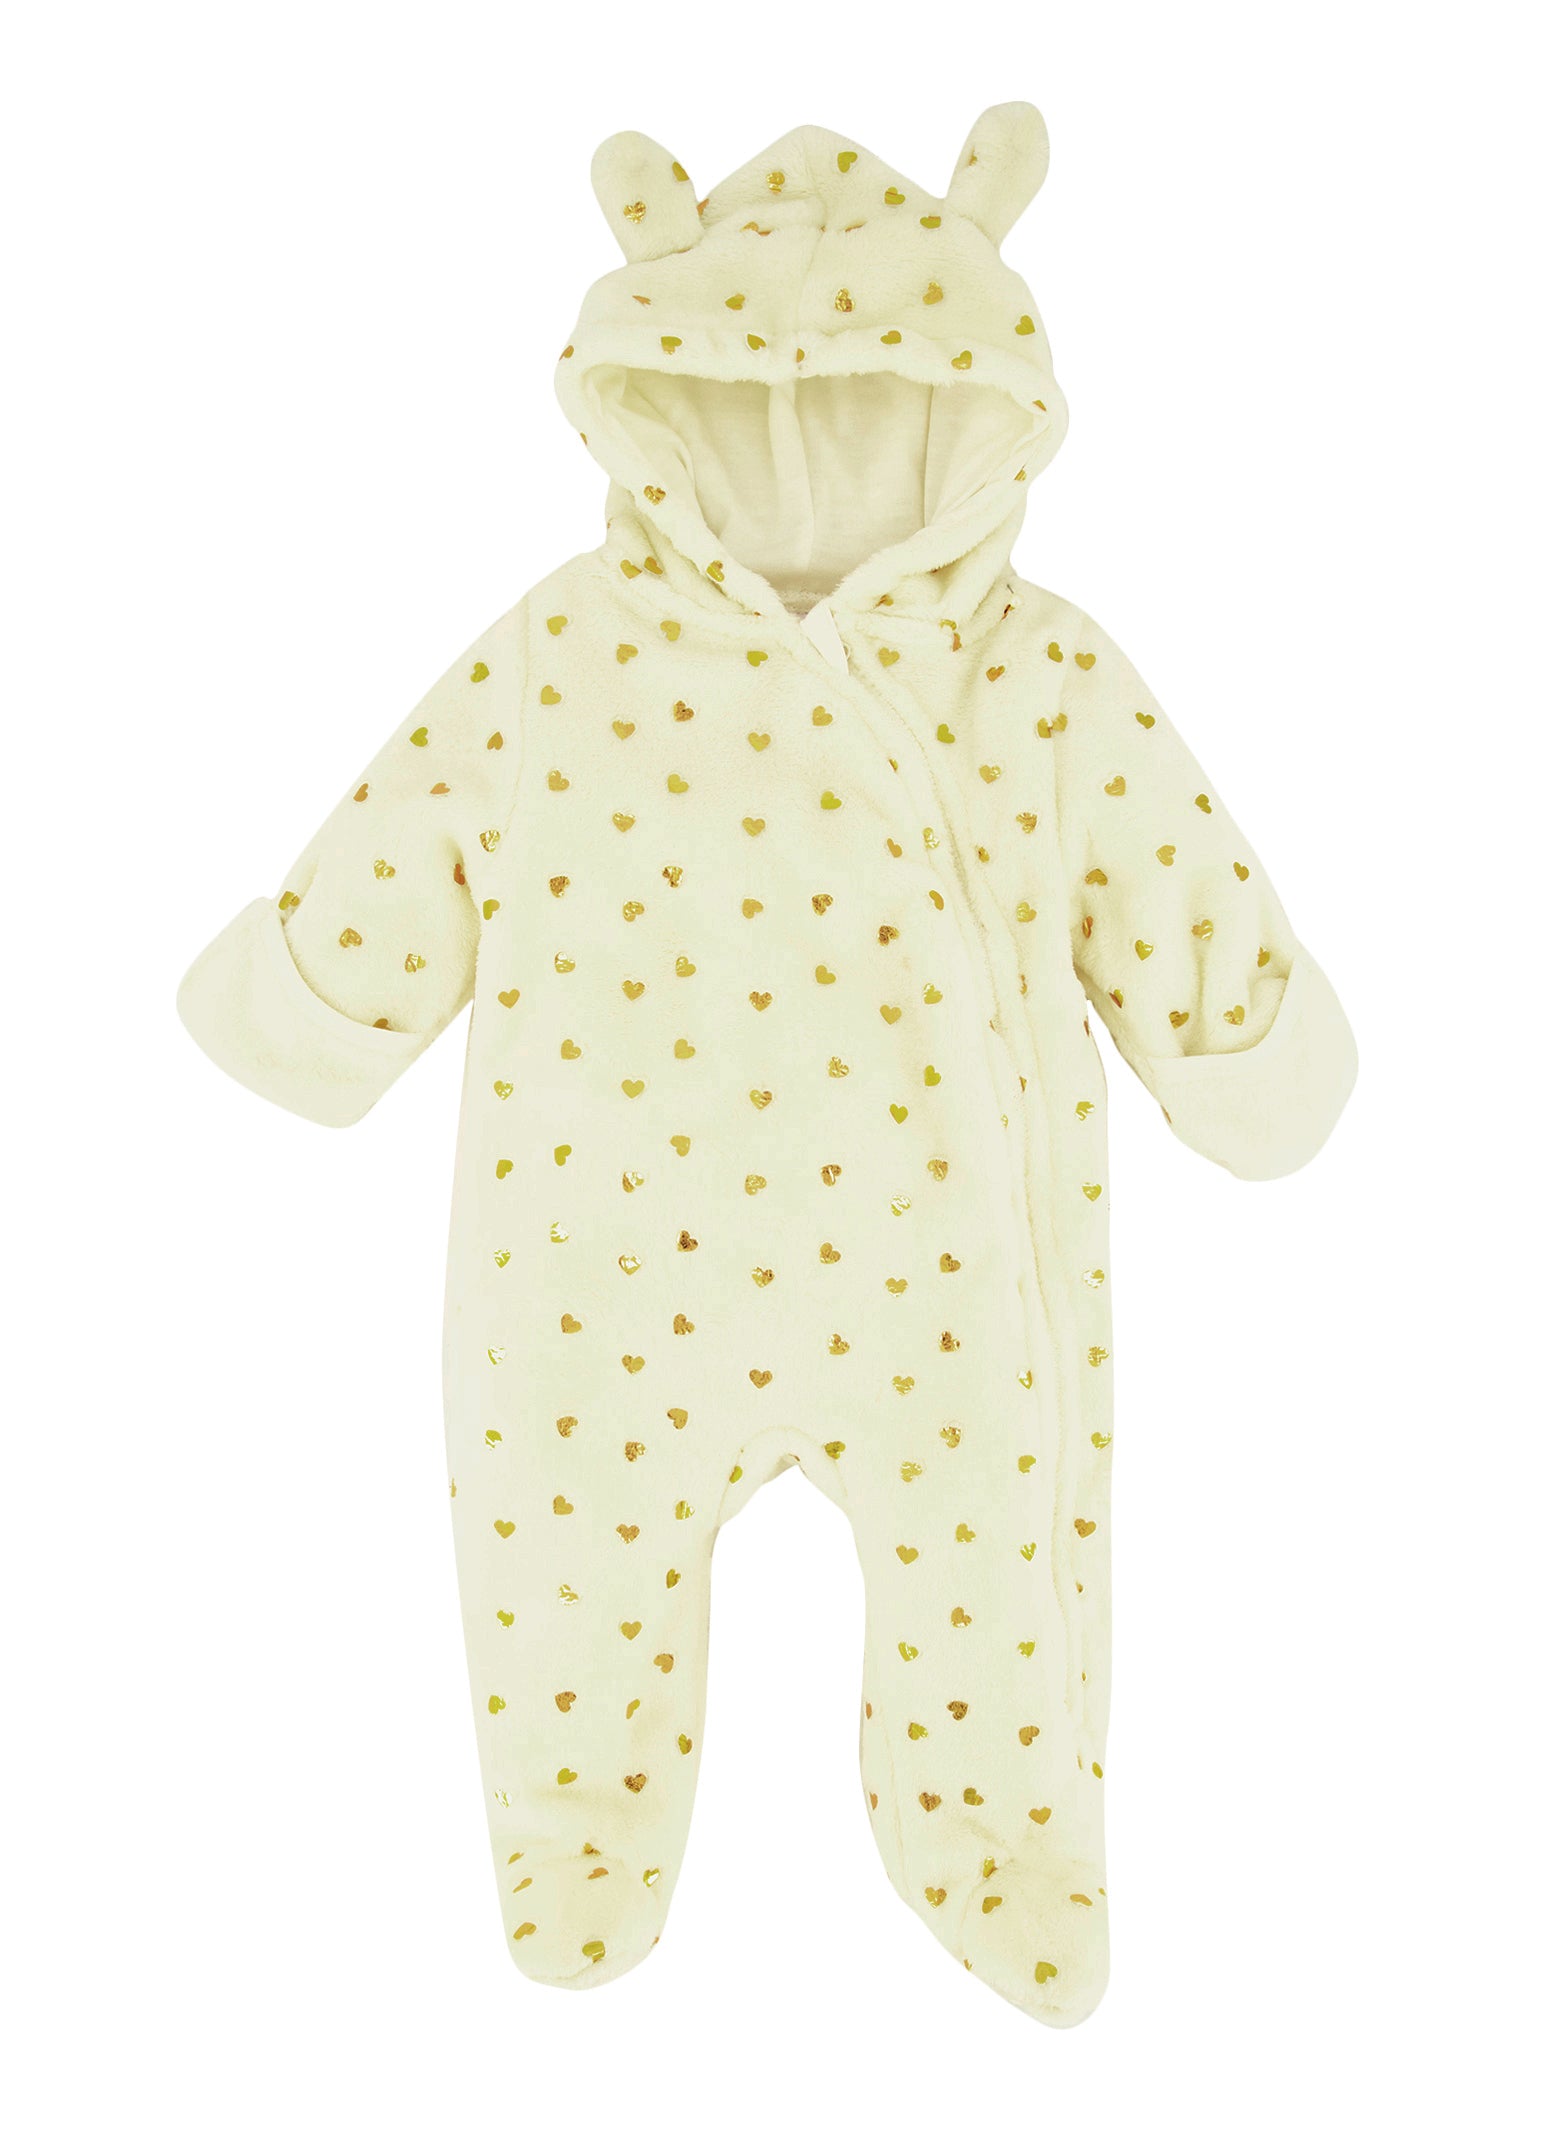 Baby Girls 0-9M Foil Heart Print Footed Jumpsuit, Beige, Size 6-9M